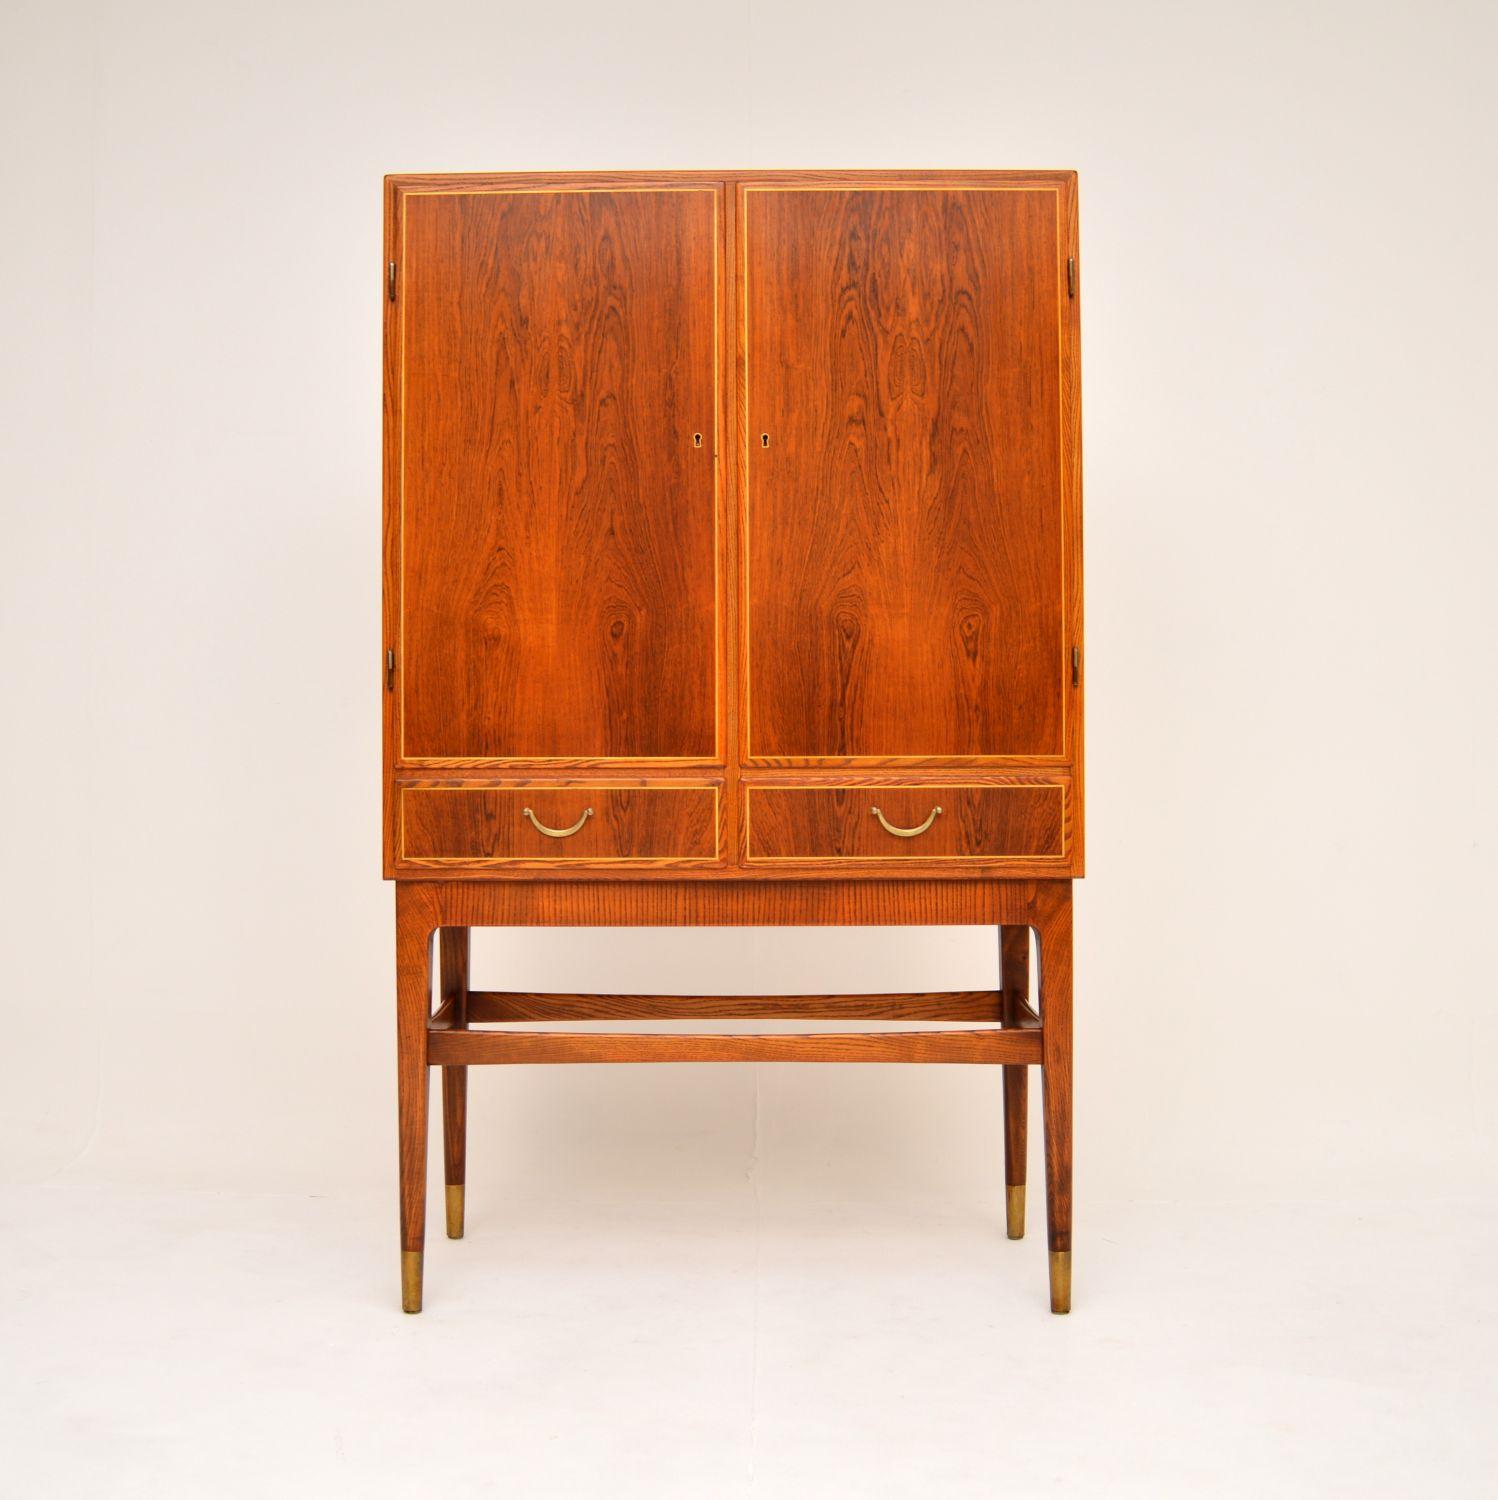 An absolutely stunning Swedish vintage cabinet. This was made by Nordiska in the 1960’s, it was recently imported from Sweden.

The quality is exceptional, this has a beautiful design, with amazing brass inlays around the door and drawers fronts.